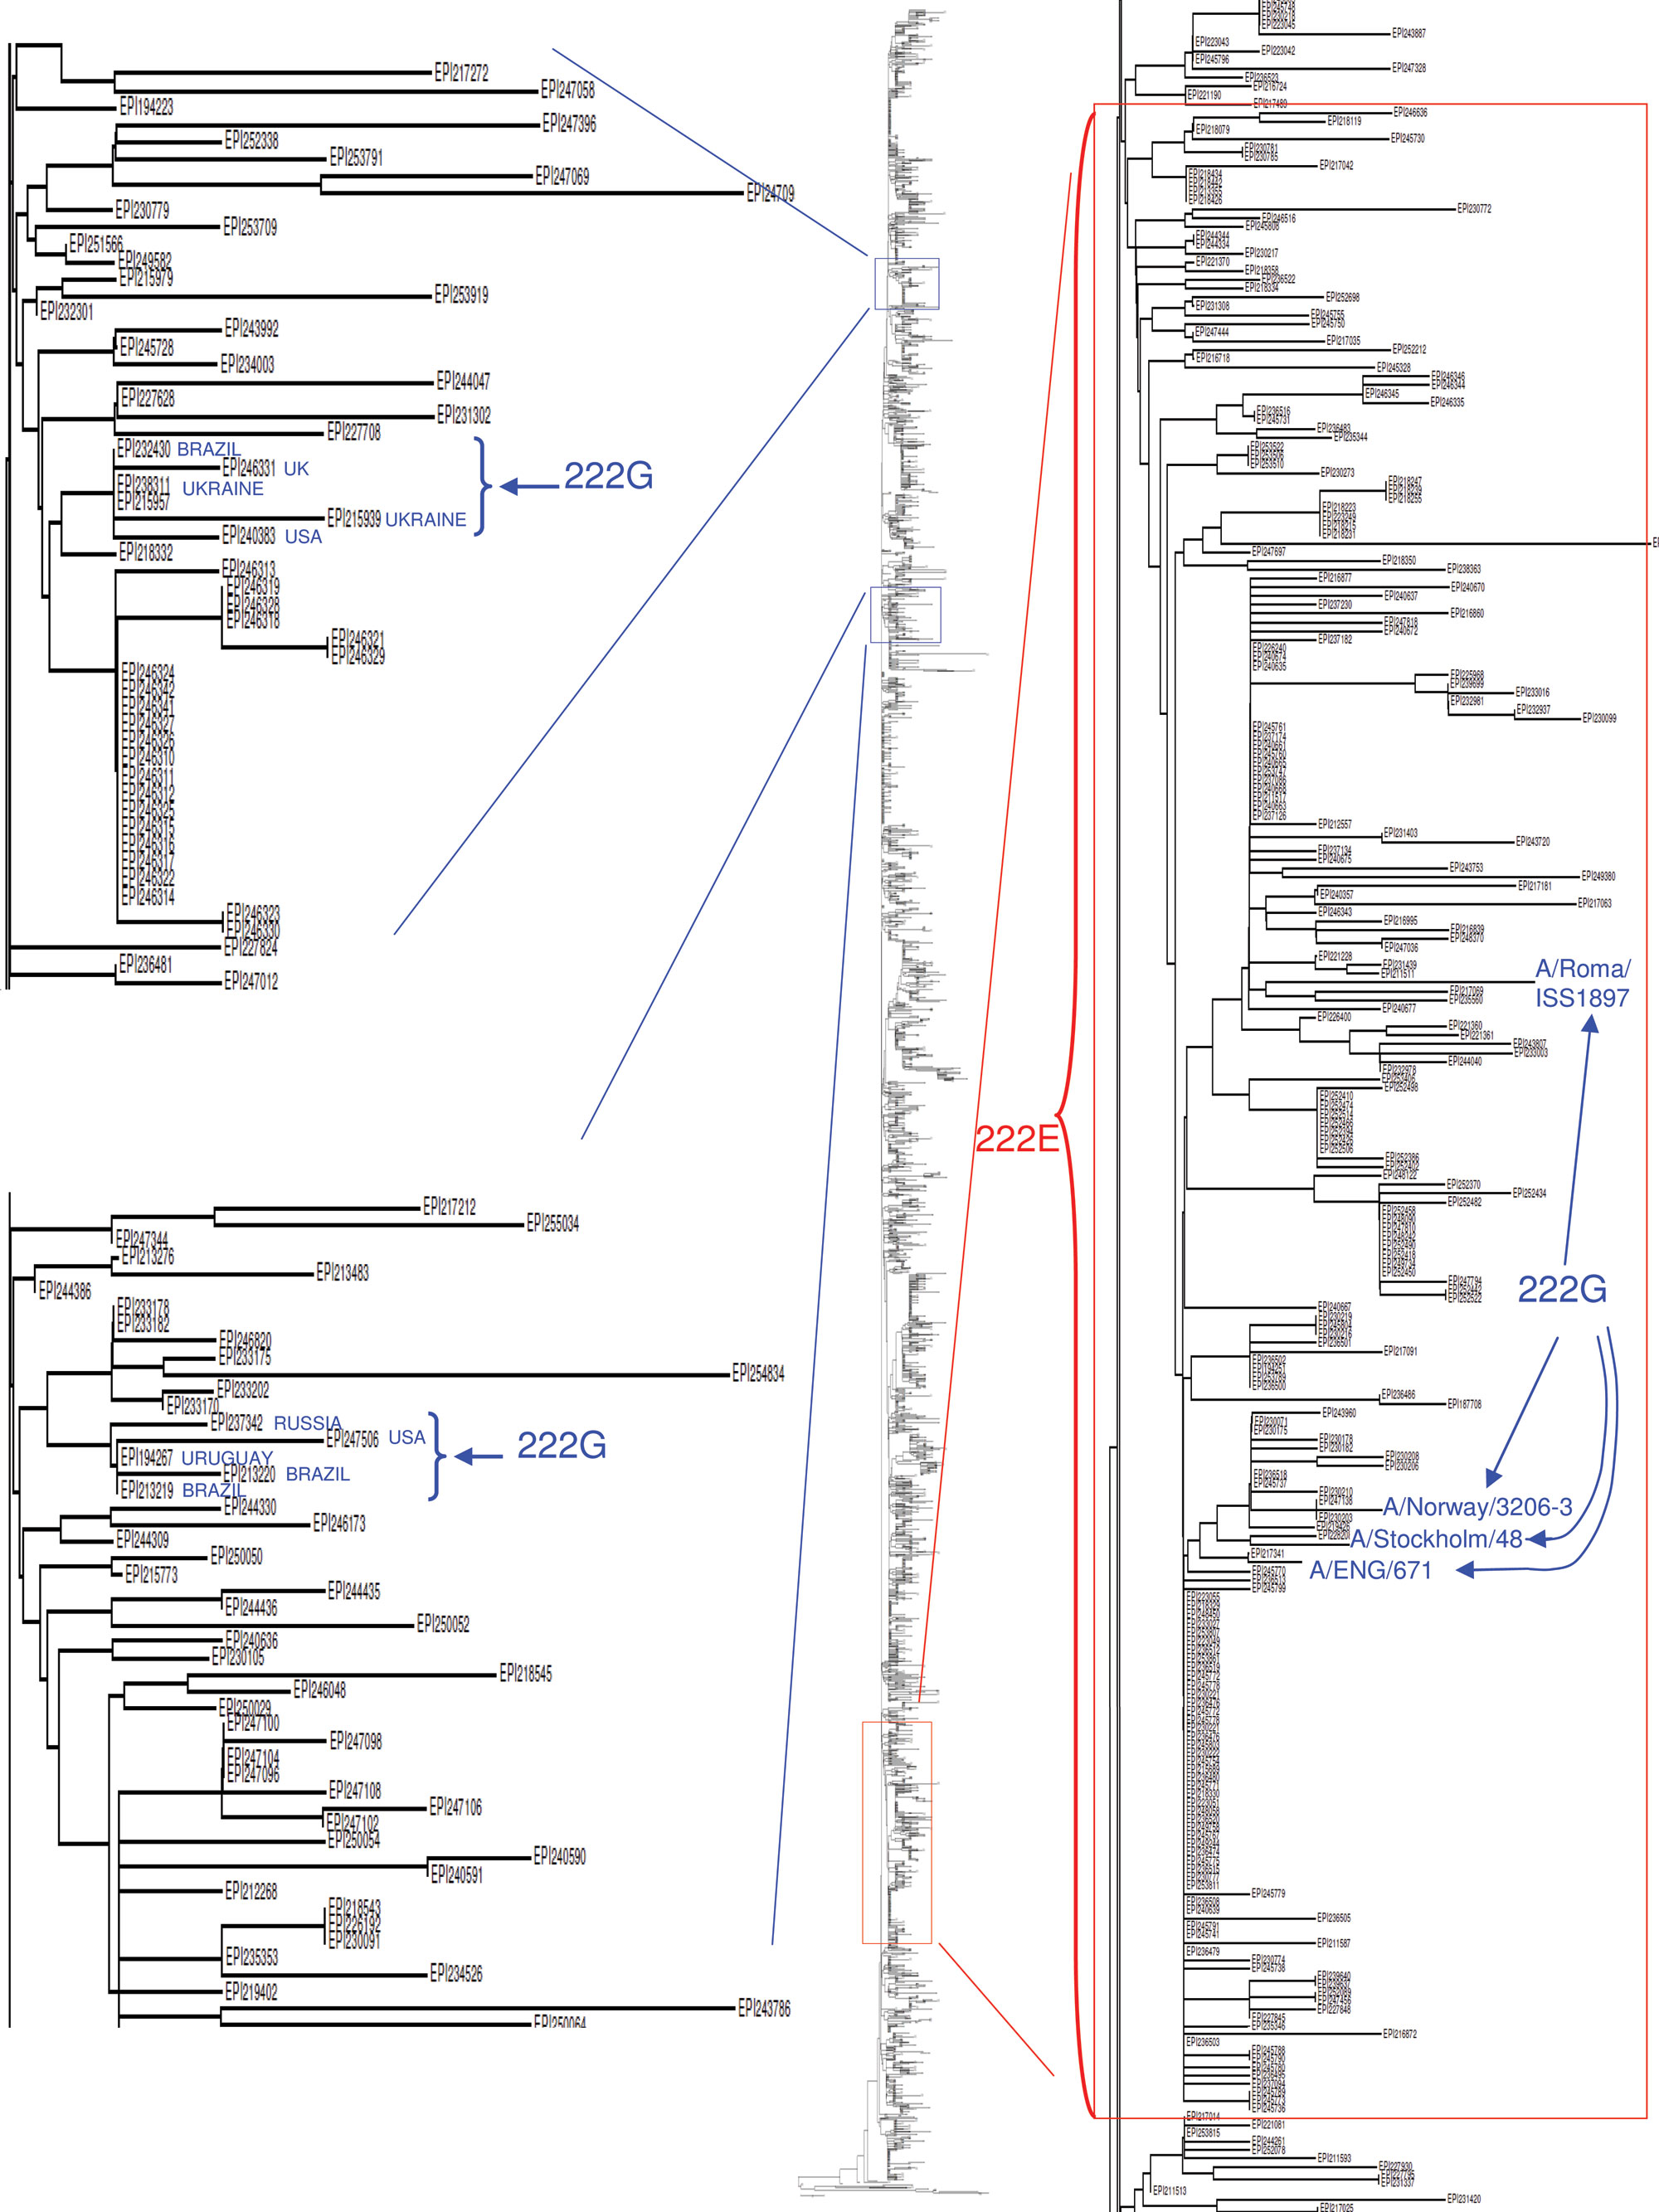 Phylogenetic relationships among 2,492 complete hemagglutinin (HA) genes of pandemic (H1N1) 2009. At the center, the whole neighbor-joining tree. On the left, enlargement of 2 regions of the tree including pure monophyletic D222G clusters, indicated in blue. On the right, enlargement of the monophyletic D222E virus cluster, including 98% of the global 222E isolates (red box). E222G variant isolates, as examples, respectively, from Italy (4), Norway (1), Sweden, and the United Kingdom, are indica